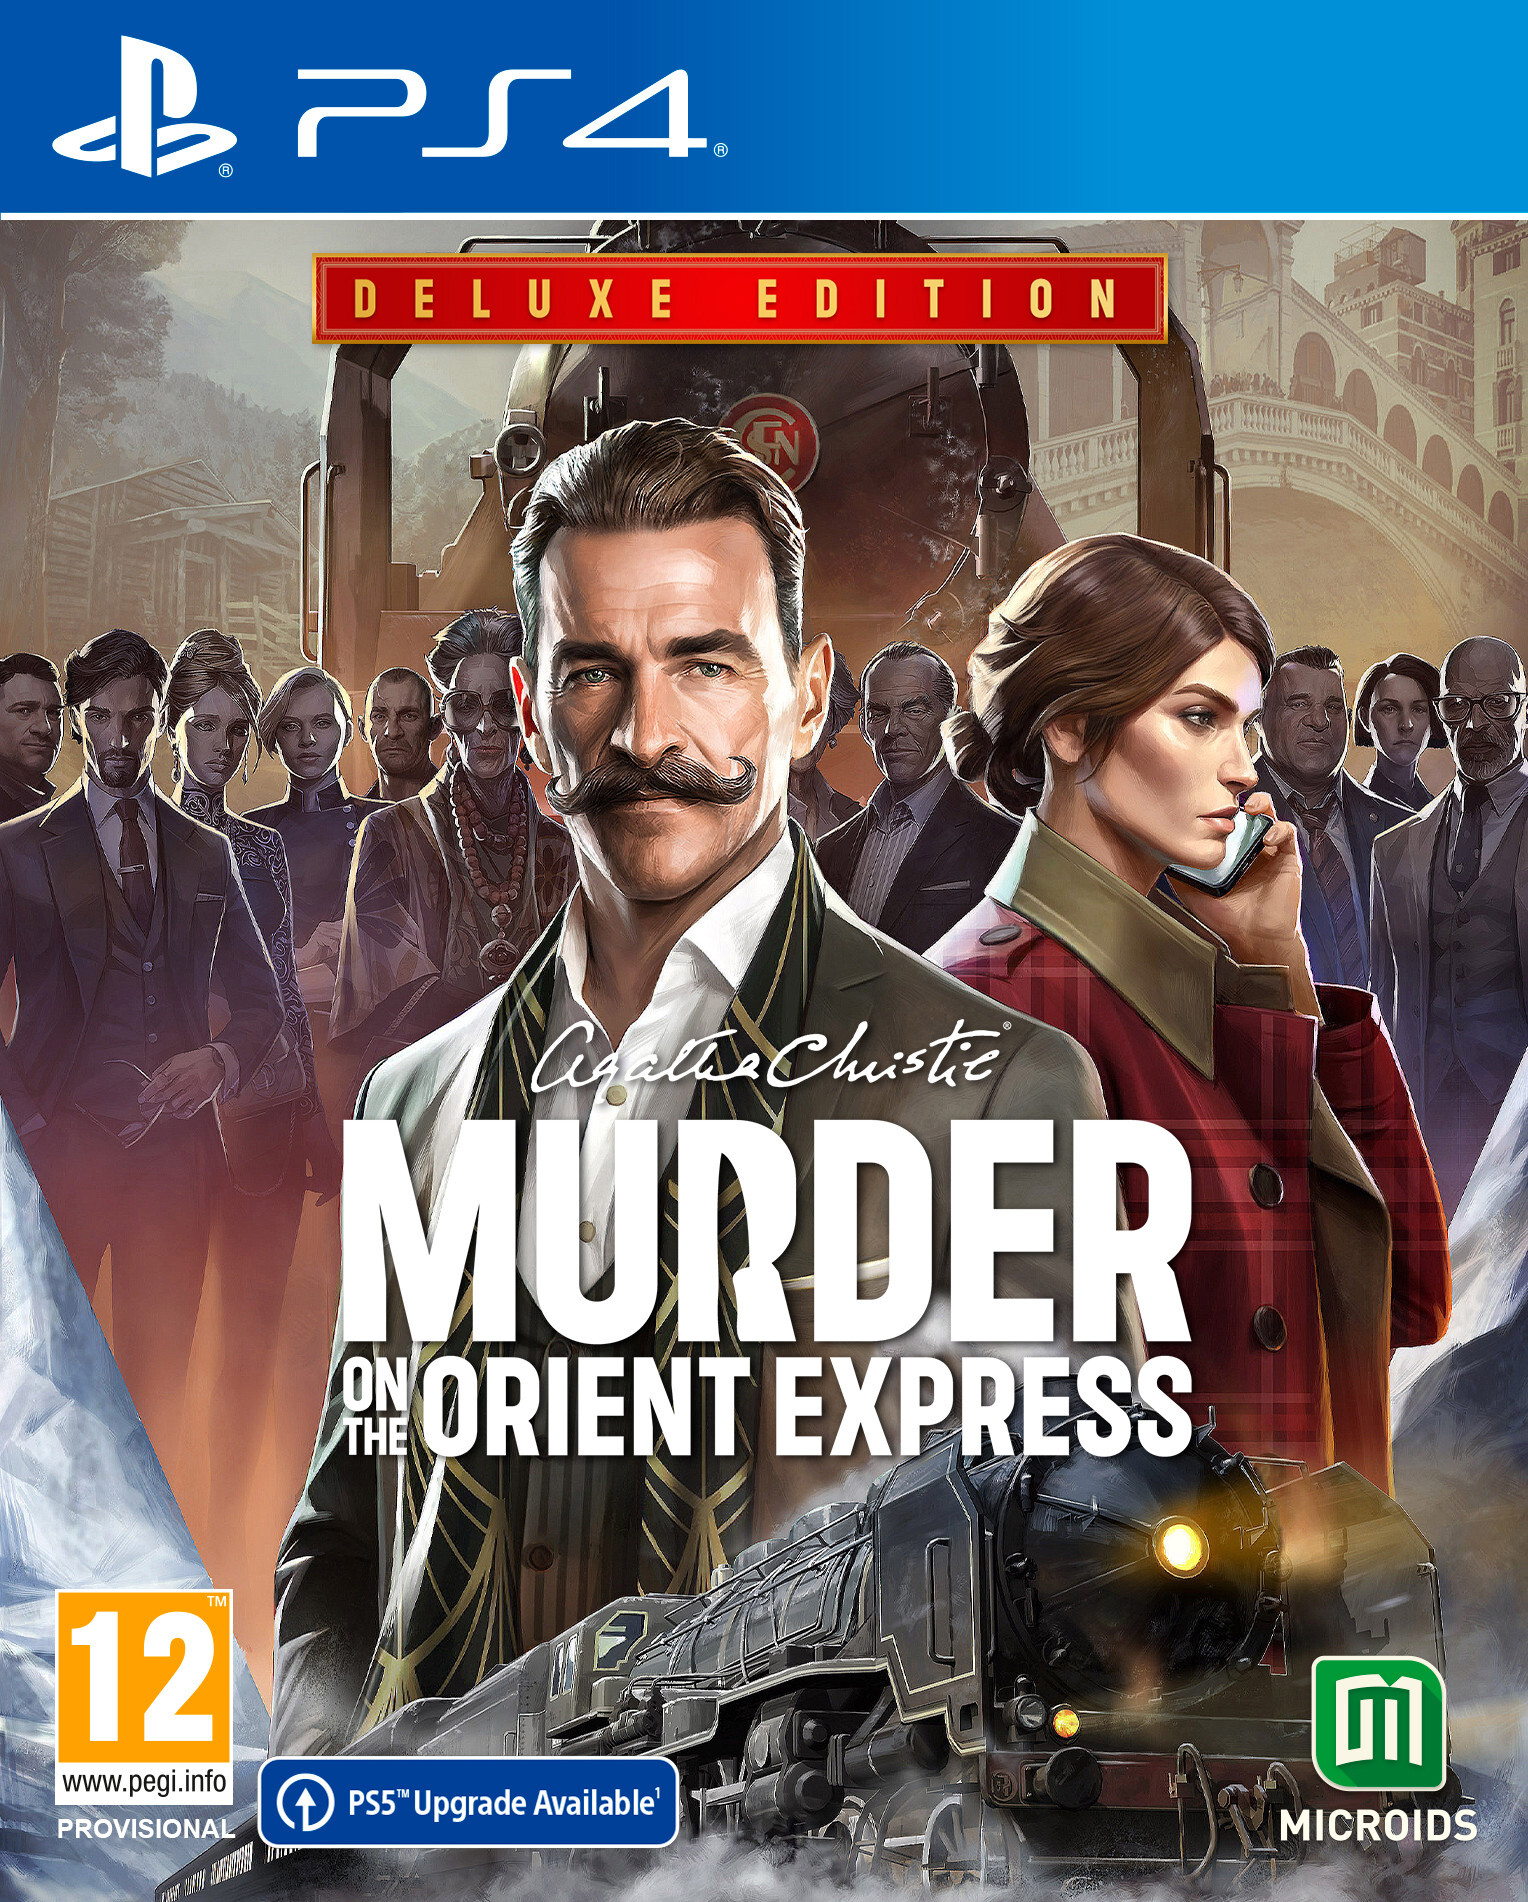 Mindscape agatha christie murder on the orient express deluxe edition PlayStation 4